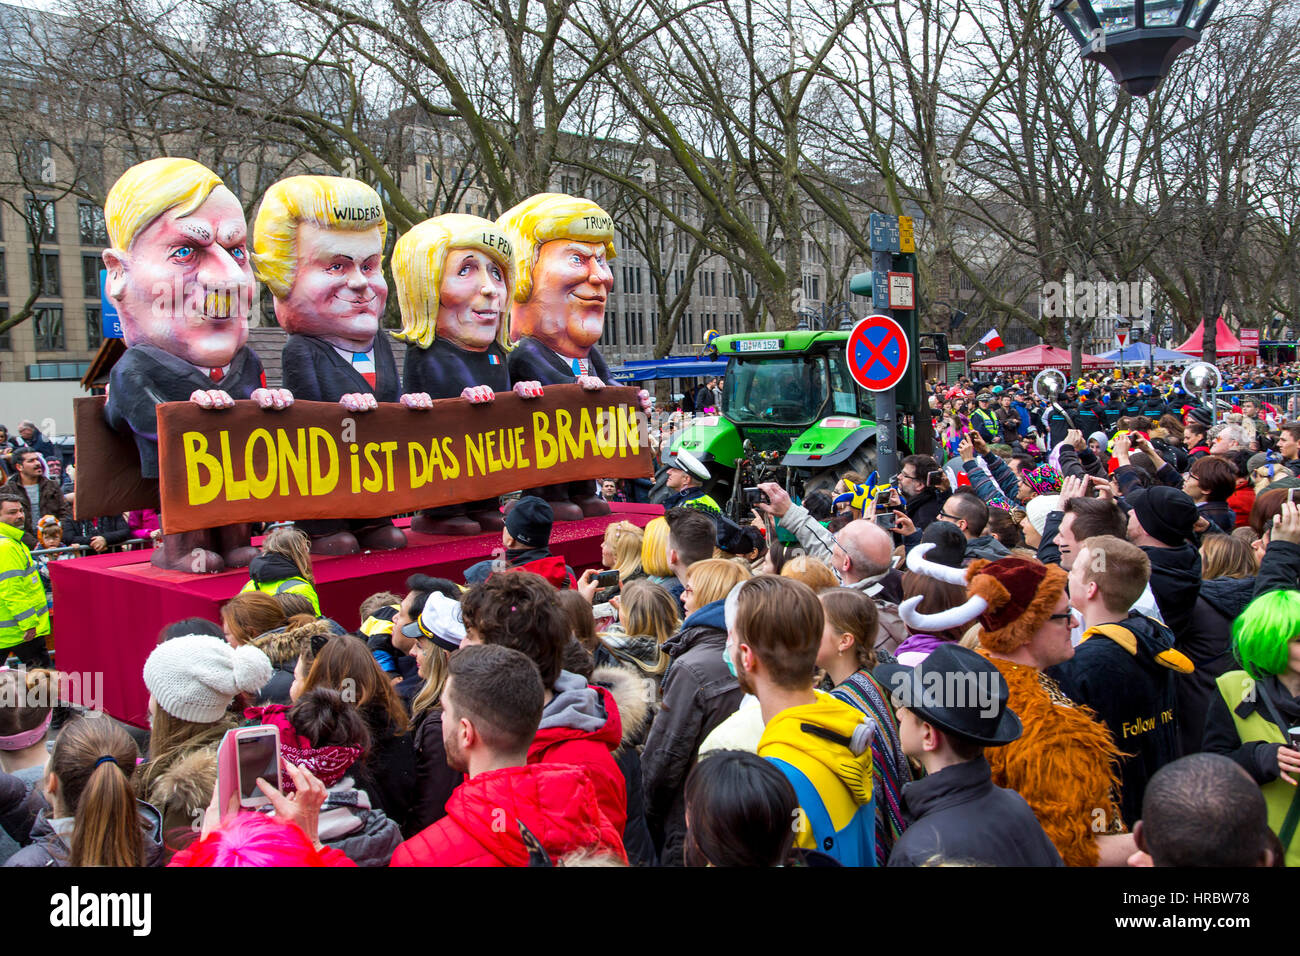 German Carnival parade in DŸsseldorf, Carnival floats designed as political caricatures, Blond is the new Brown, showing right wing politician, Adolf  Stock Photo